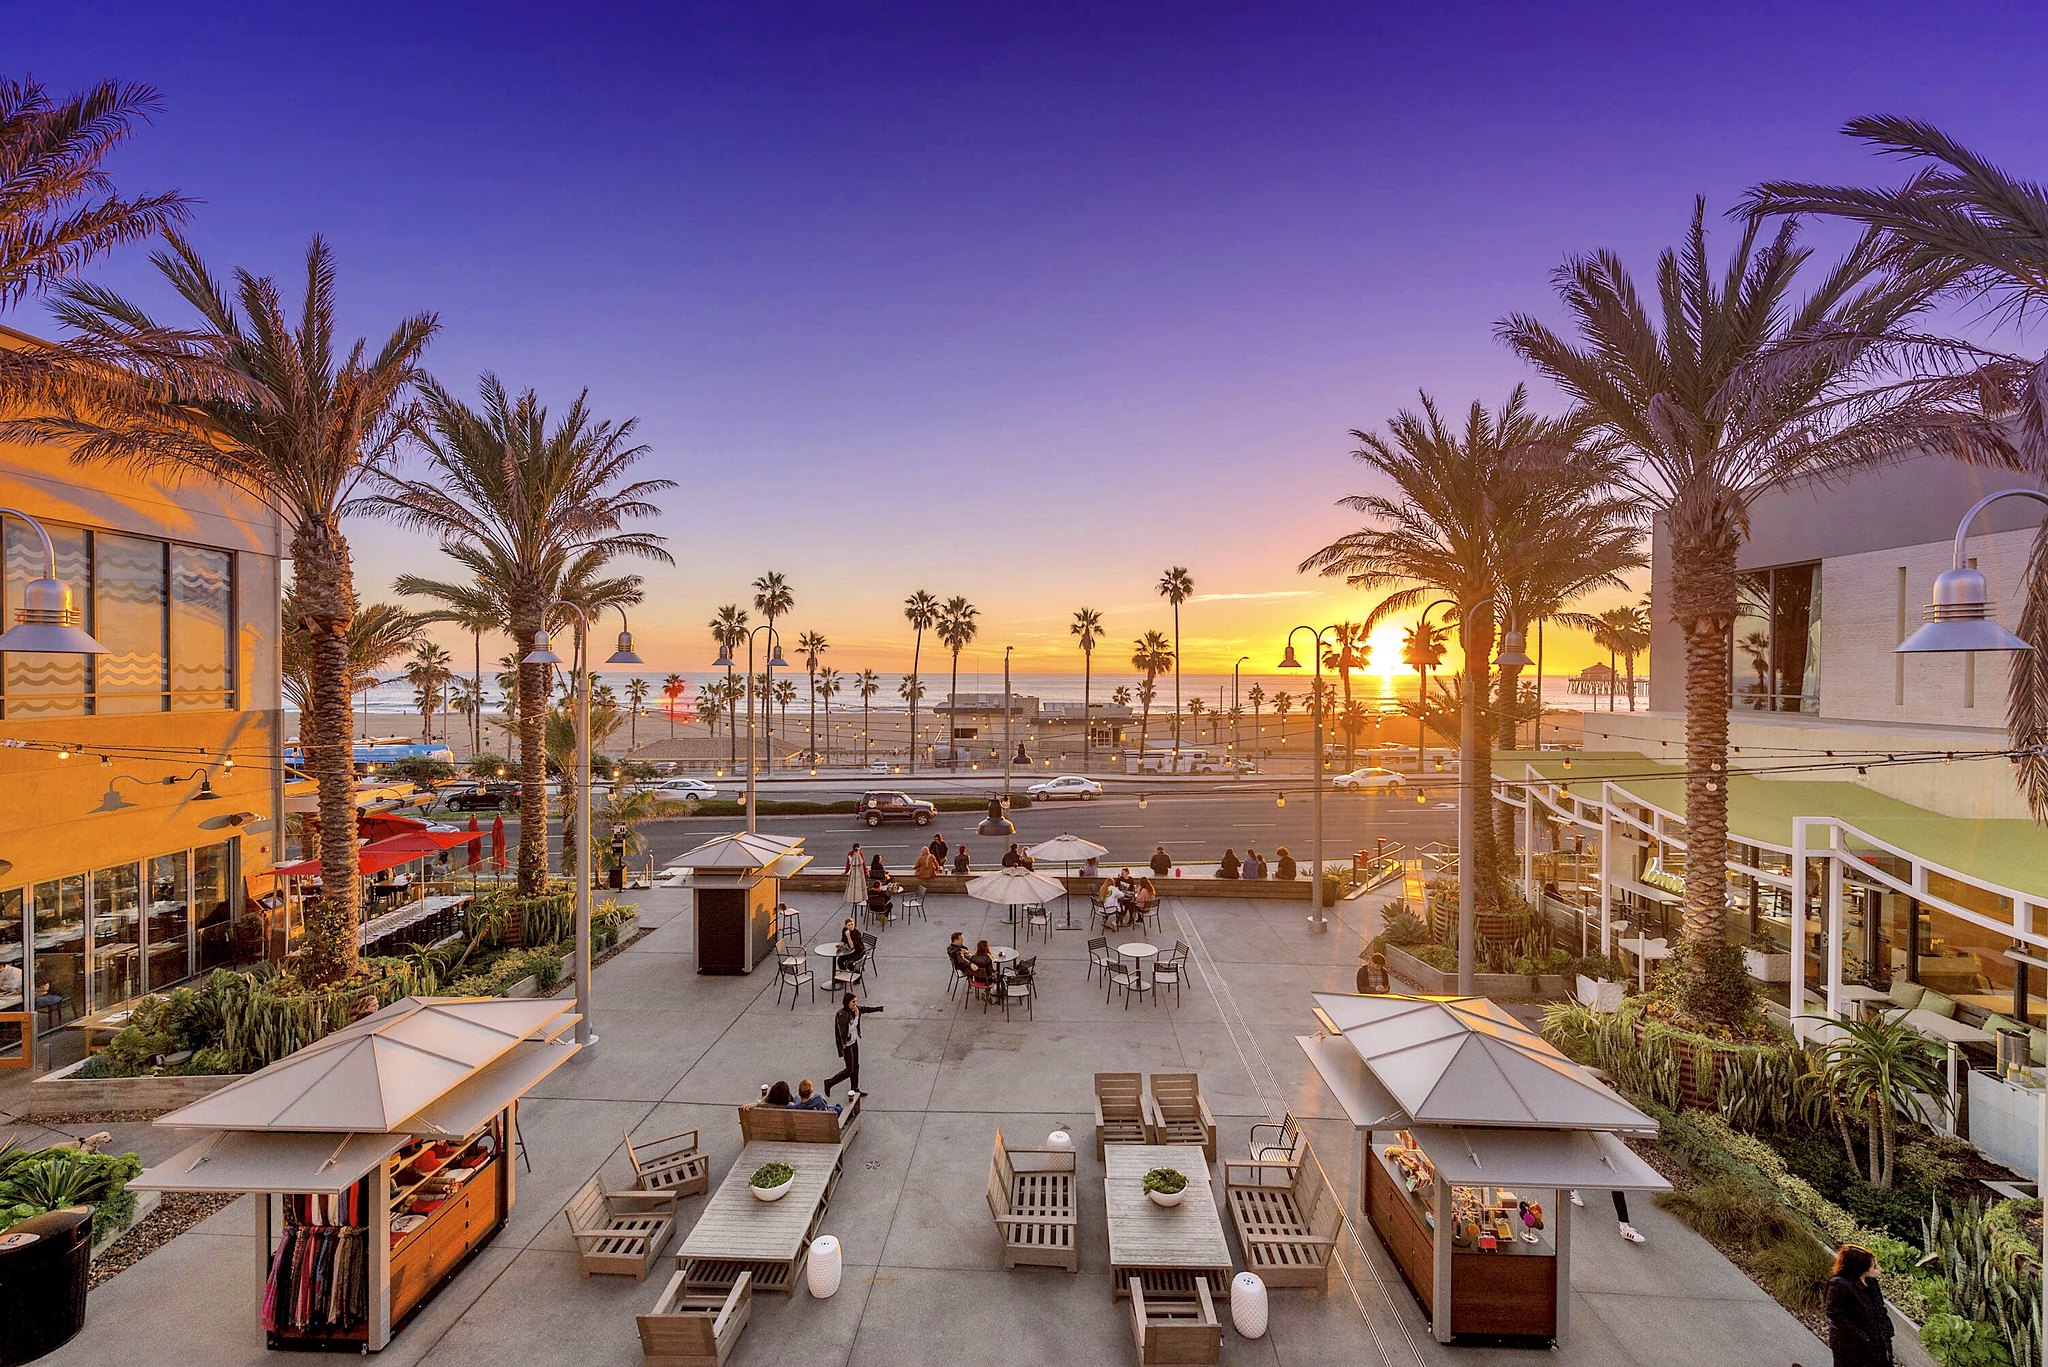 places to visit in costa mesa california